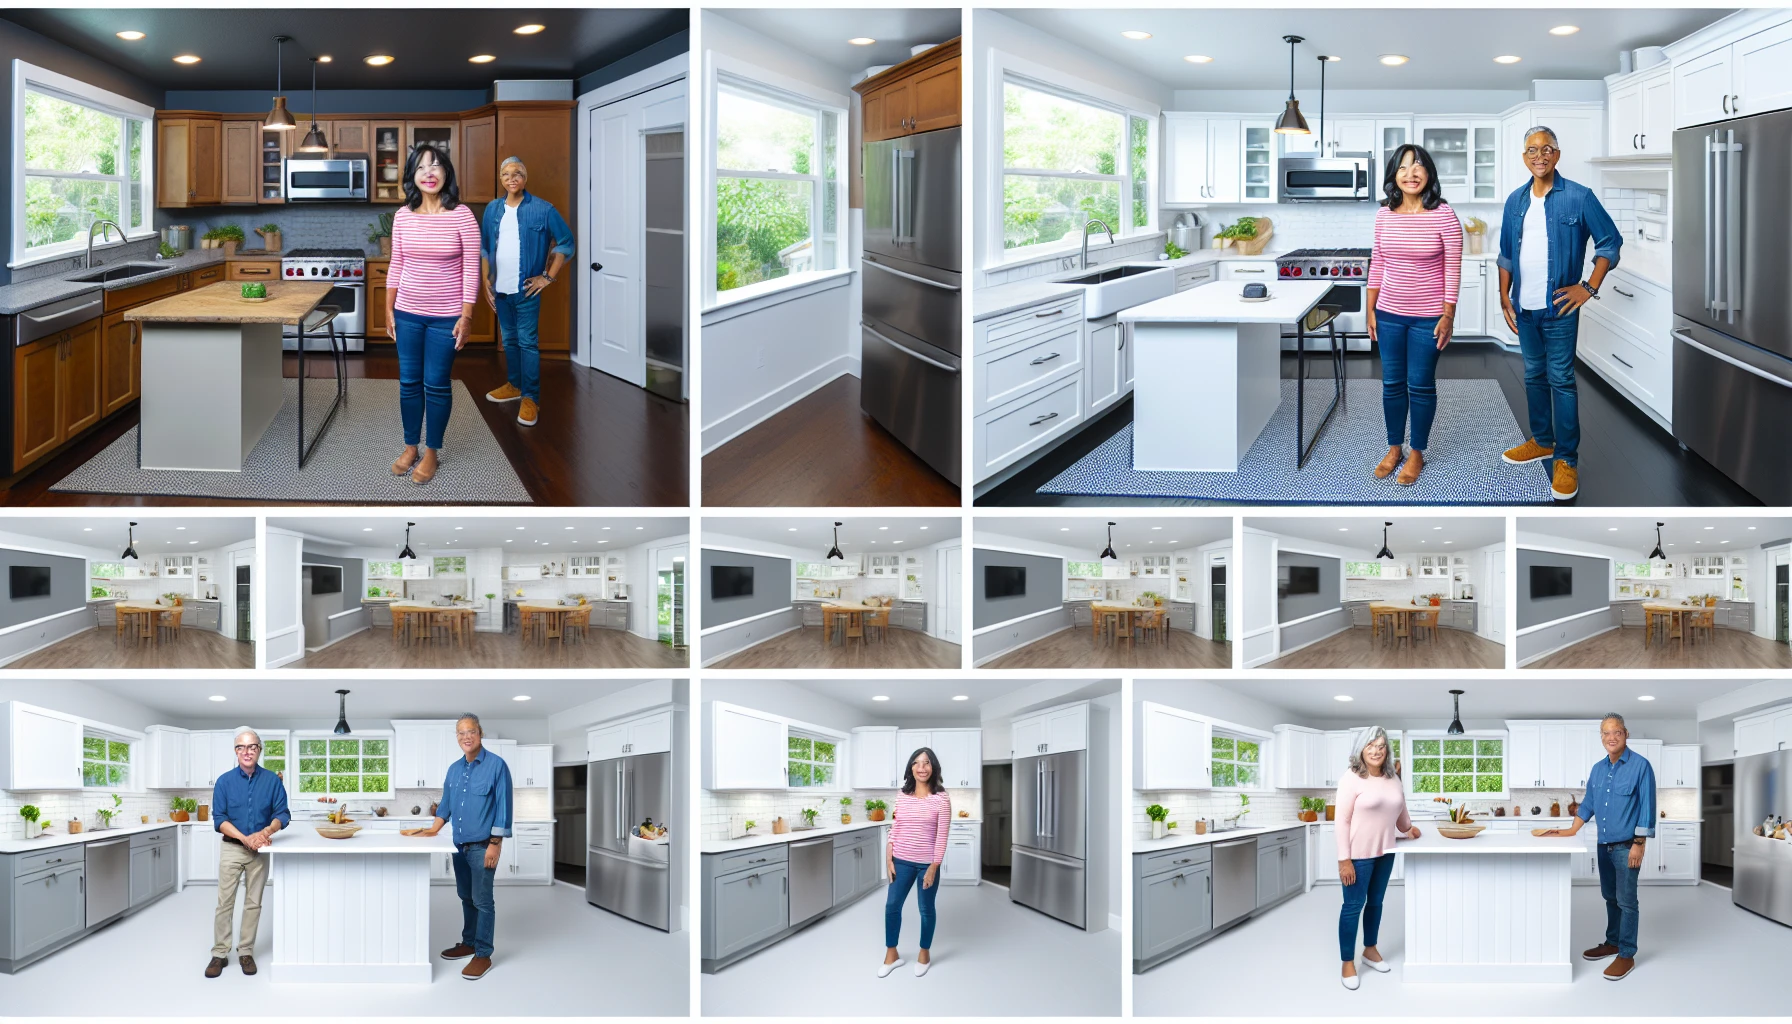 Before and after visuals of AI kitchen design transformations